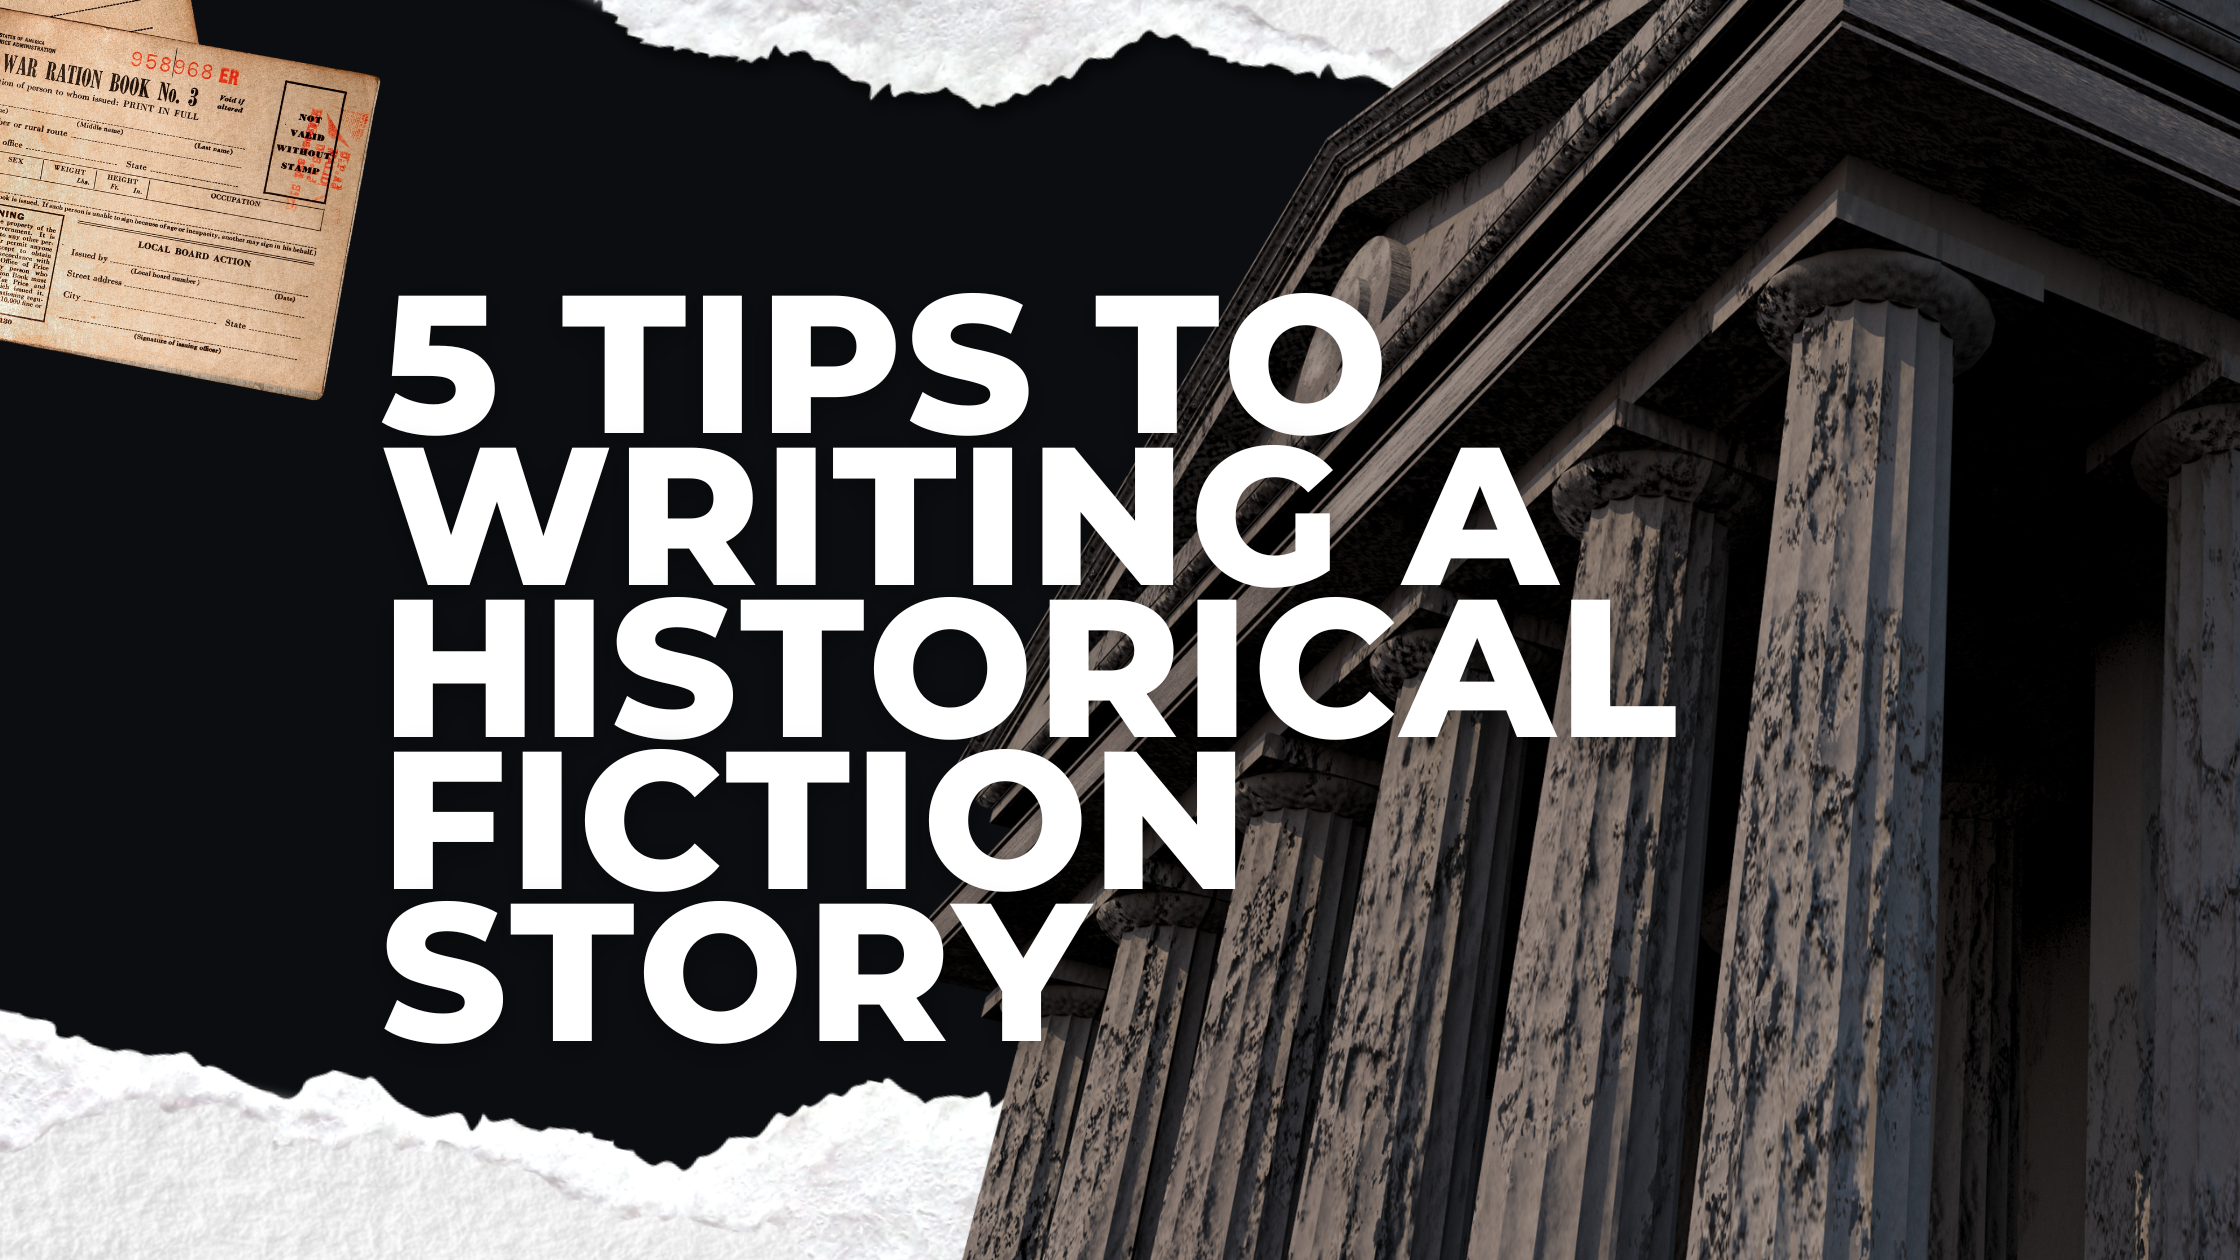 5 tips to writing a historical fiction story